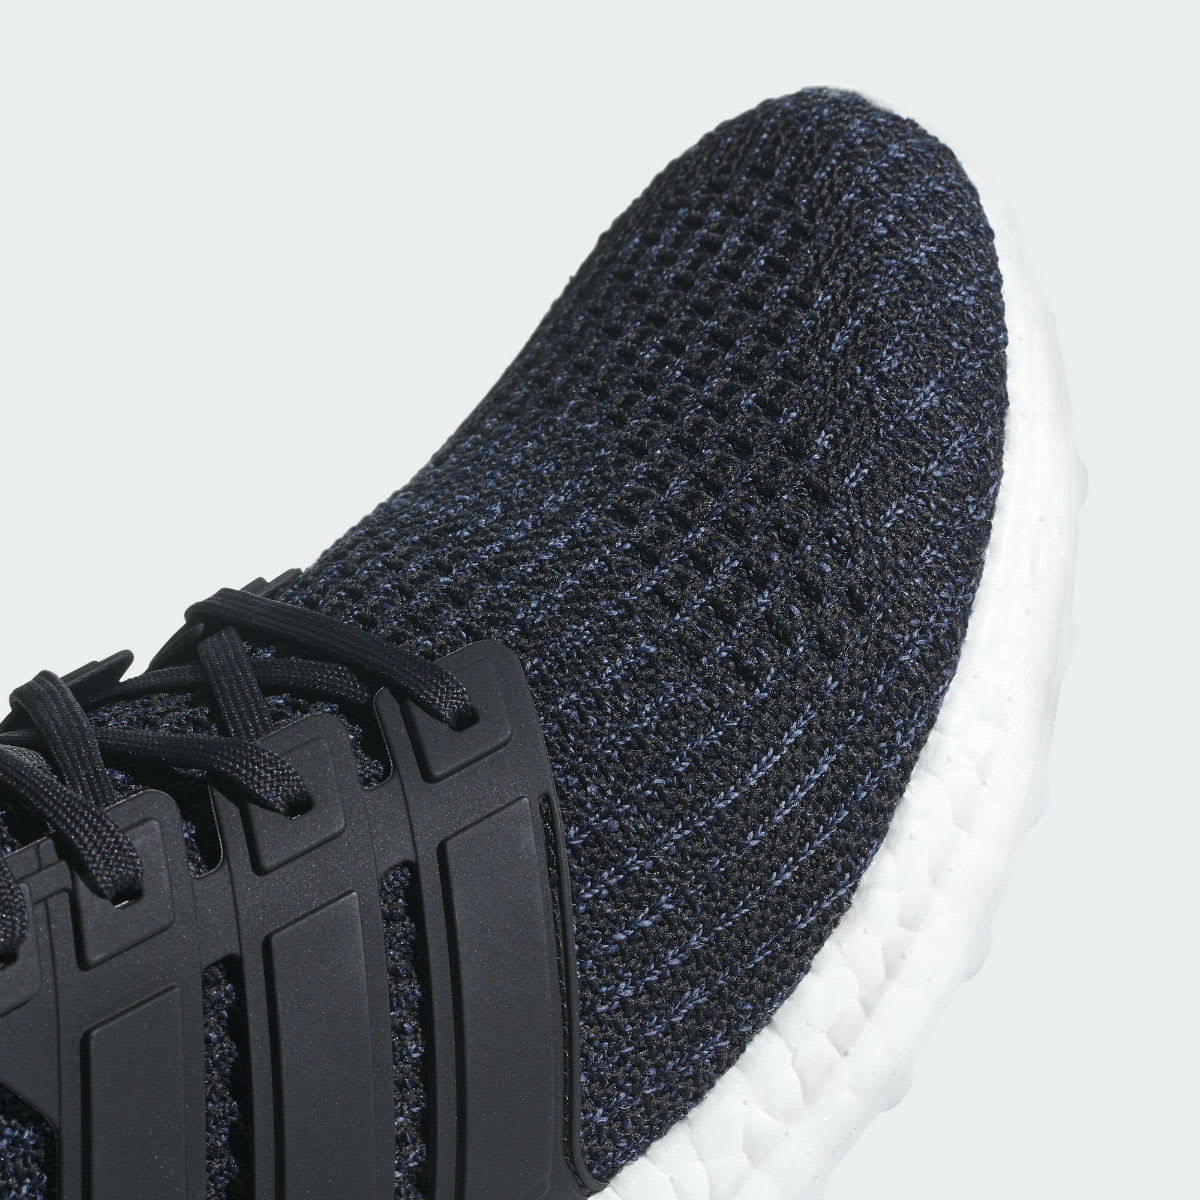 Parley x Adidas Ultra Boost Legend Ink Carbon Core Black Release Date AC7836 Toe